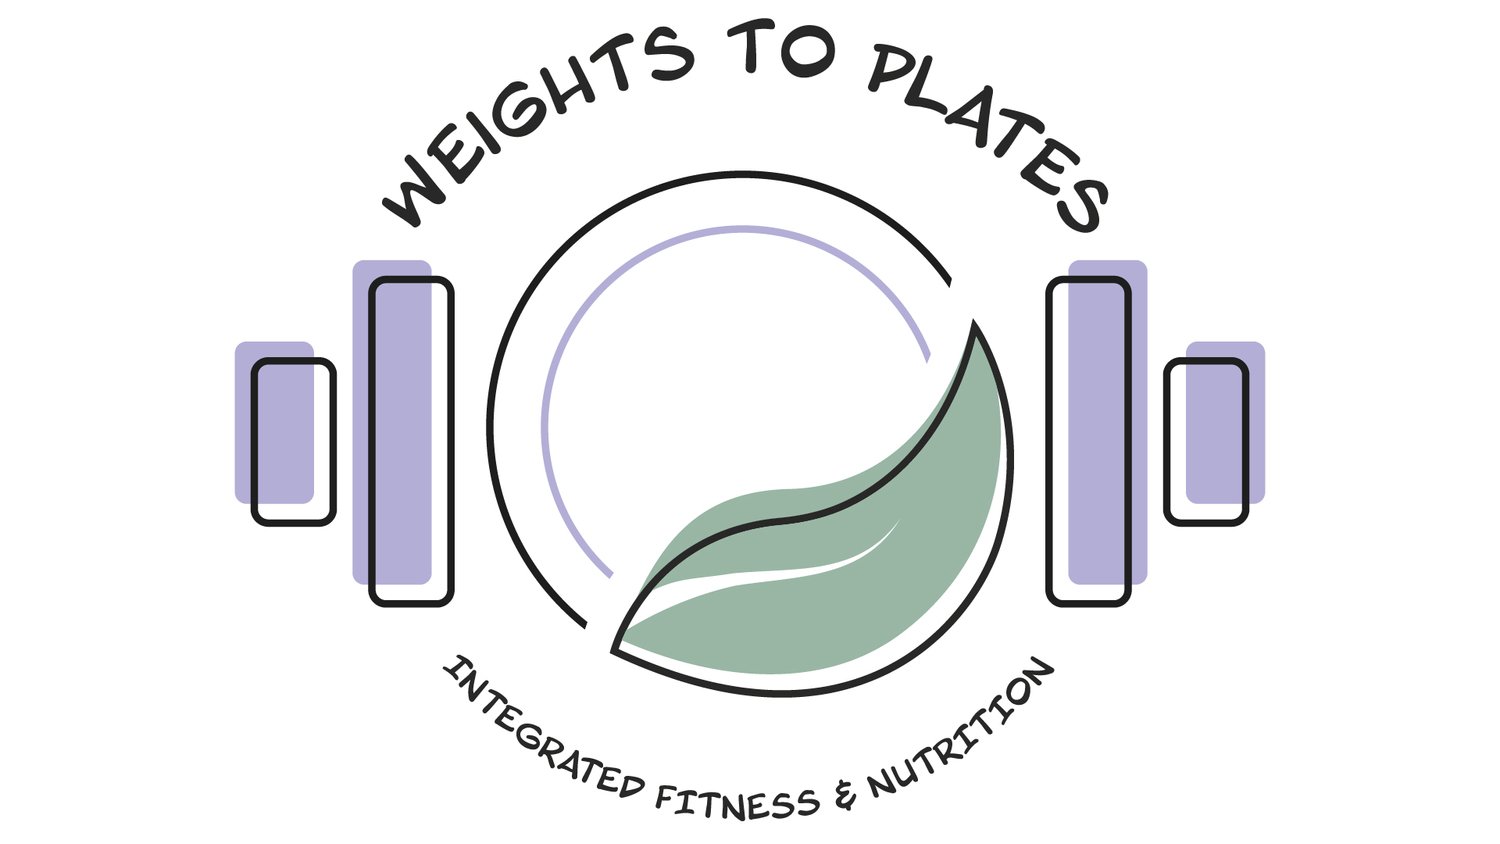 Weights to Plates